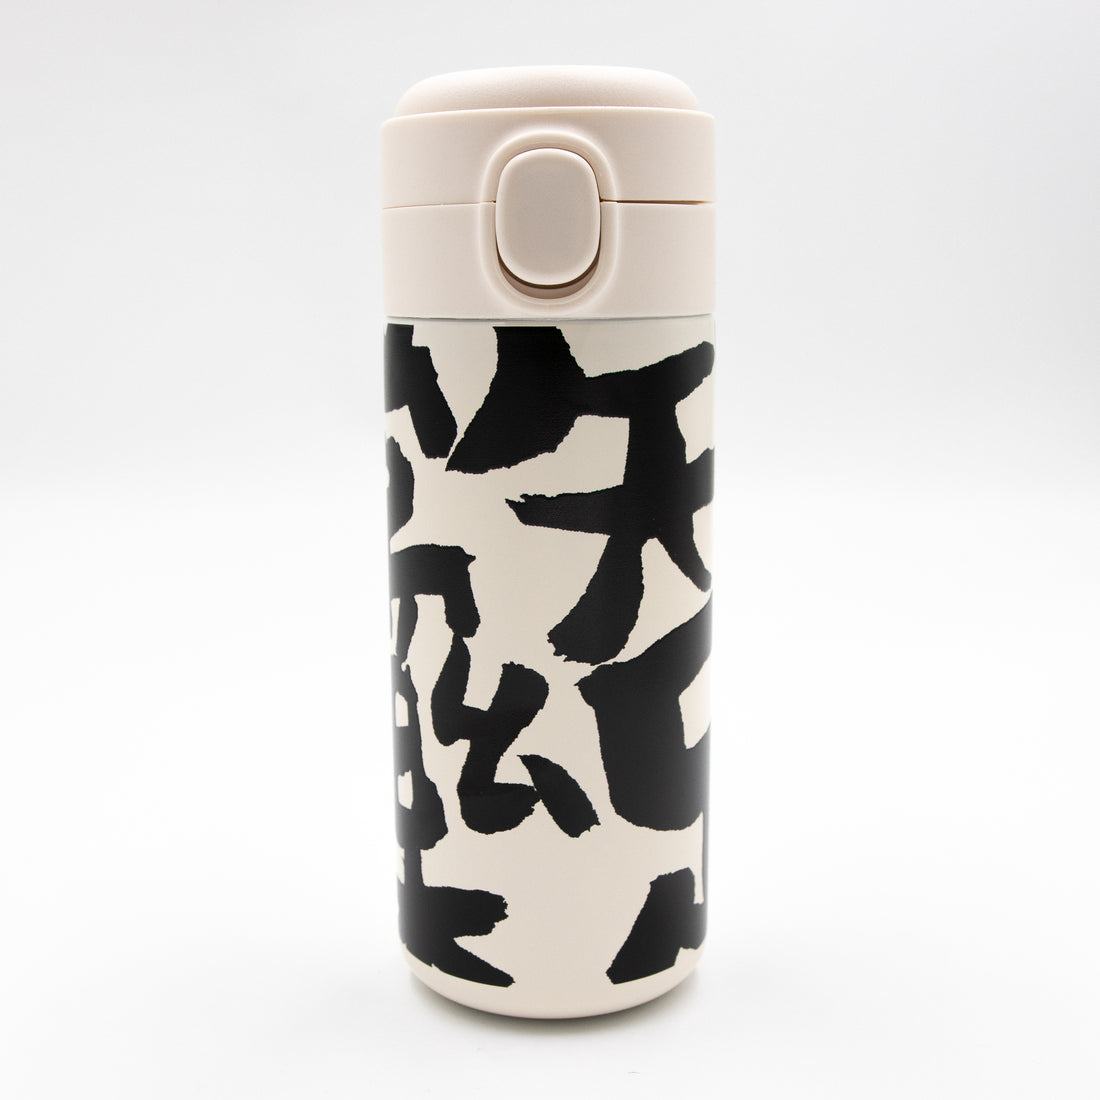 Junlefont 知足常樂保温瓶 Stay contented and happy Thermal Flask 350ml